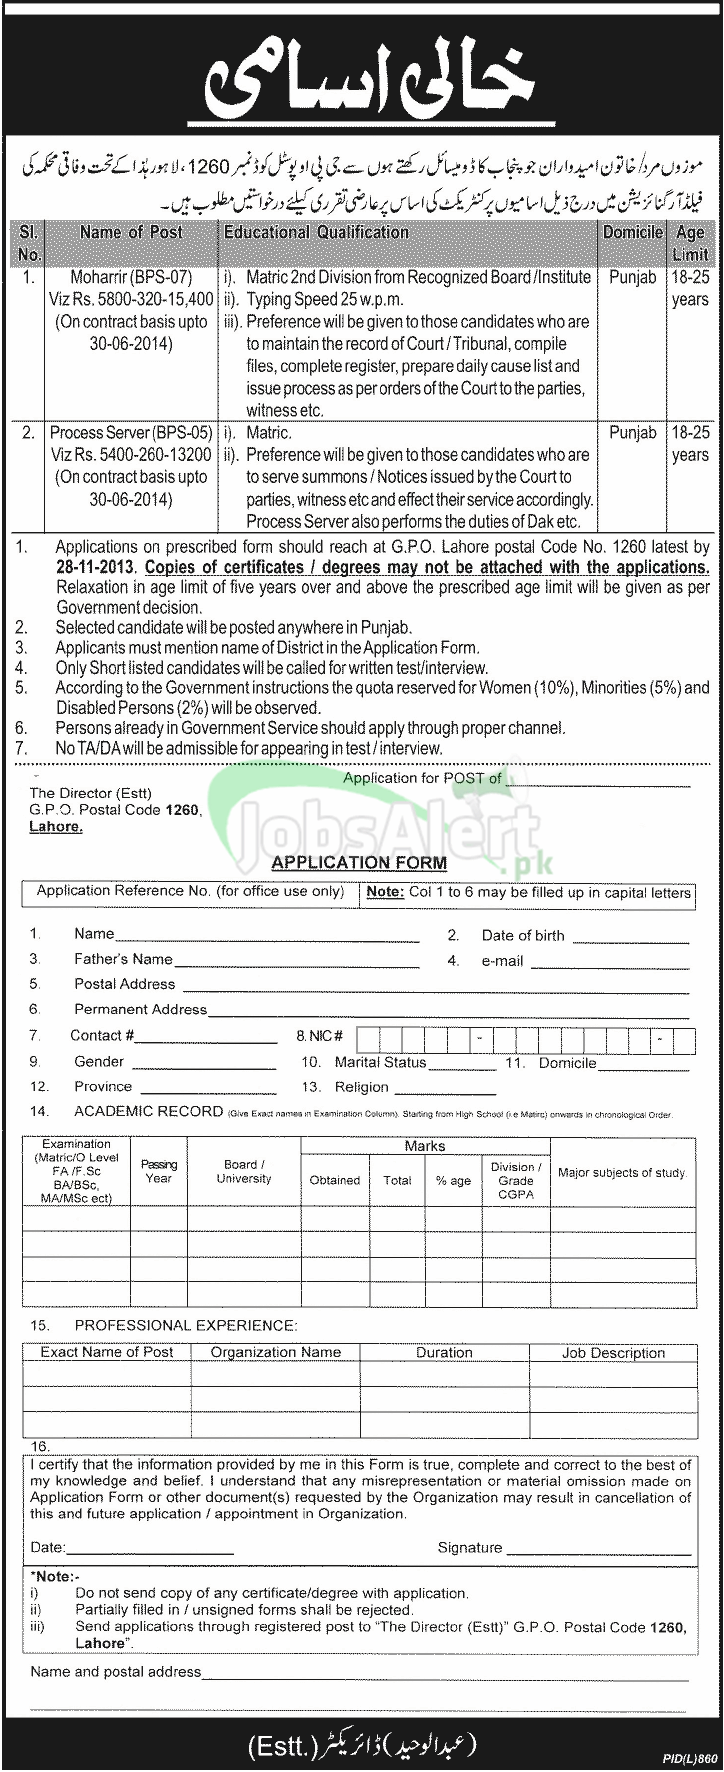 Jobs for Moharir & Process Server in Federal Department Organization